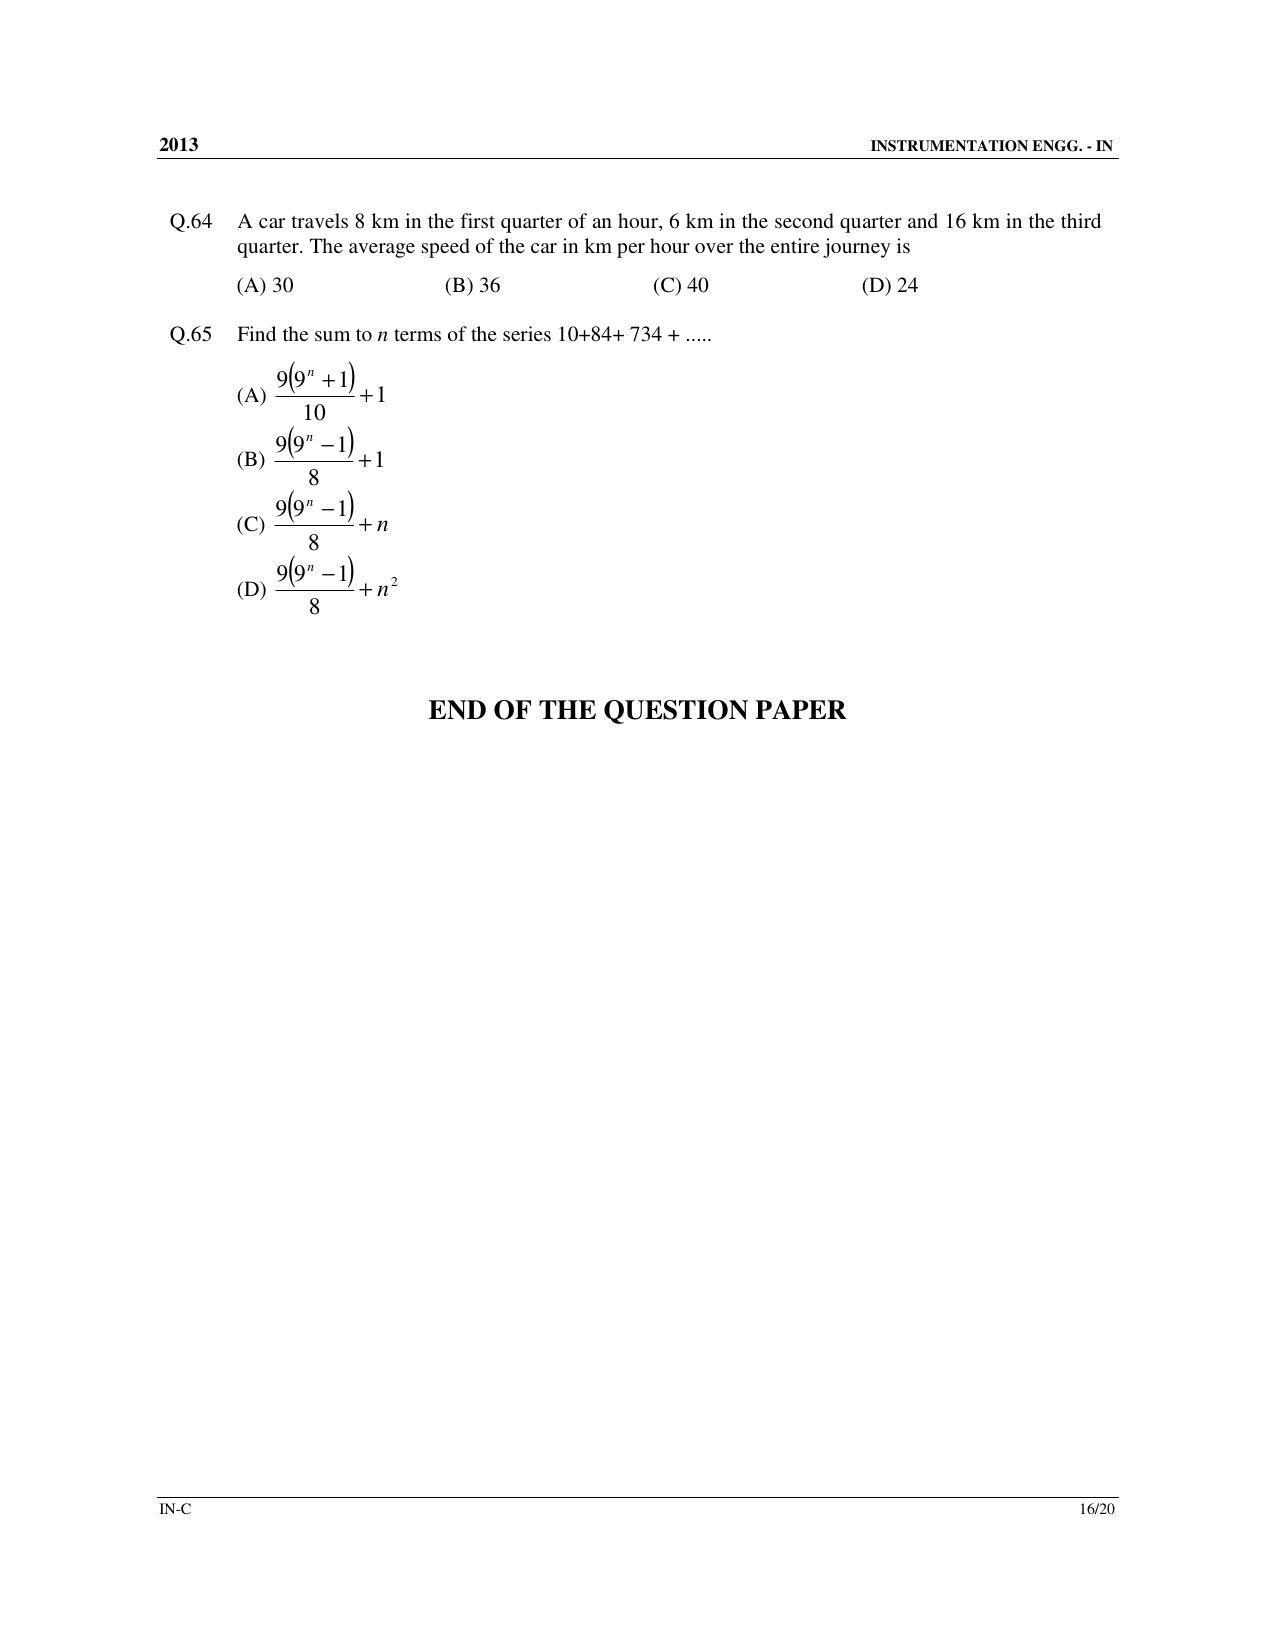 GATE 2013 Instrumentation Engineering (IN) Question Paper with Answer Key - Page 51